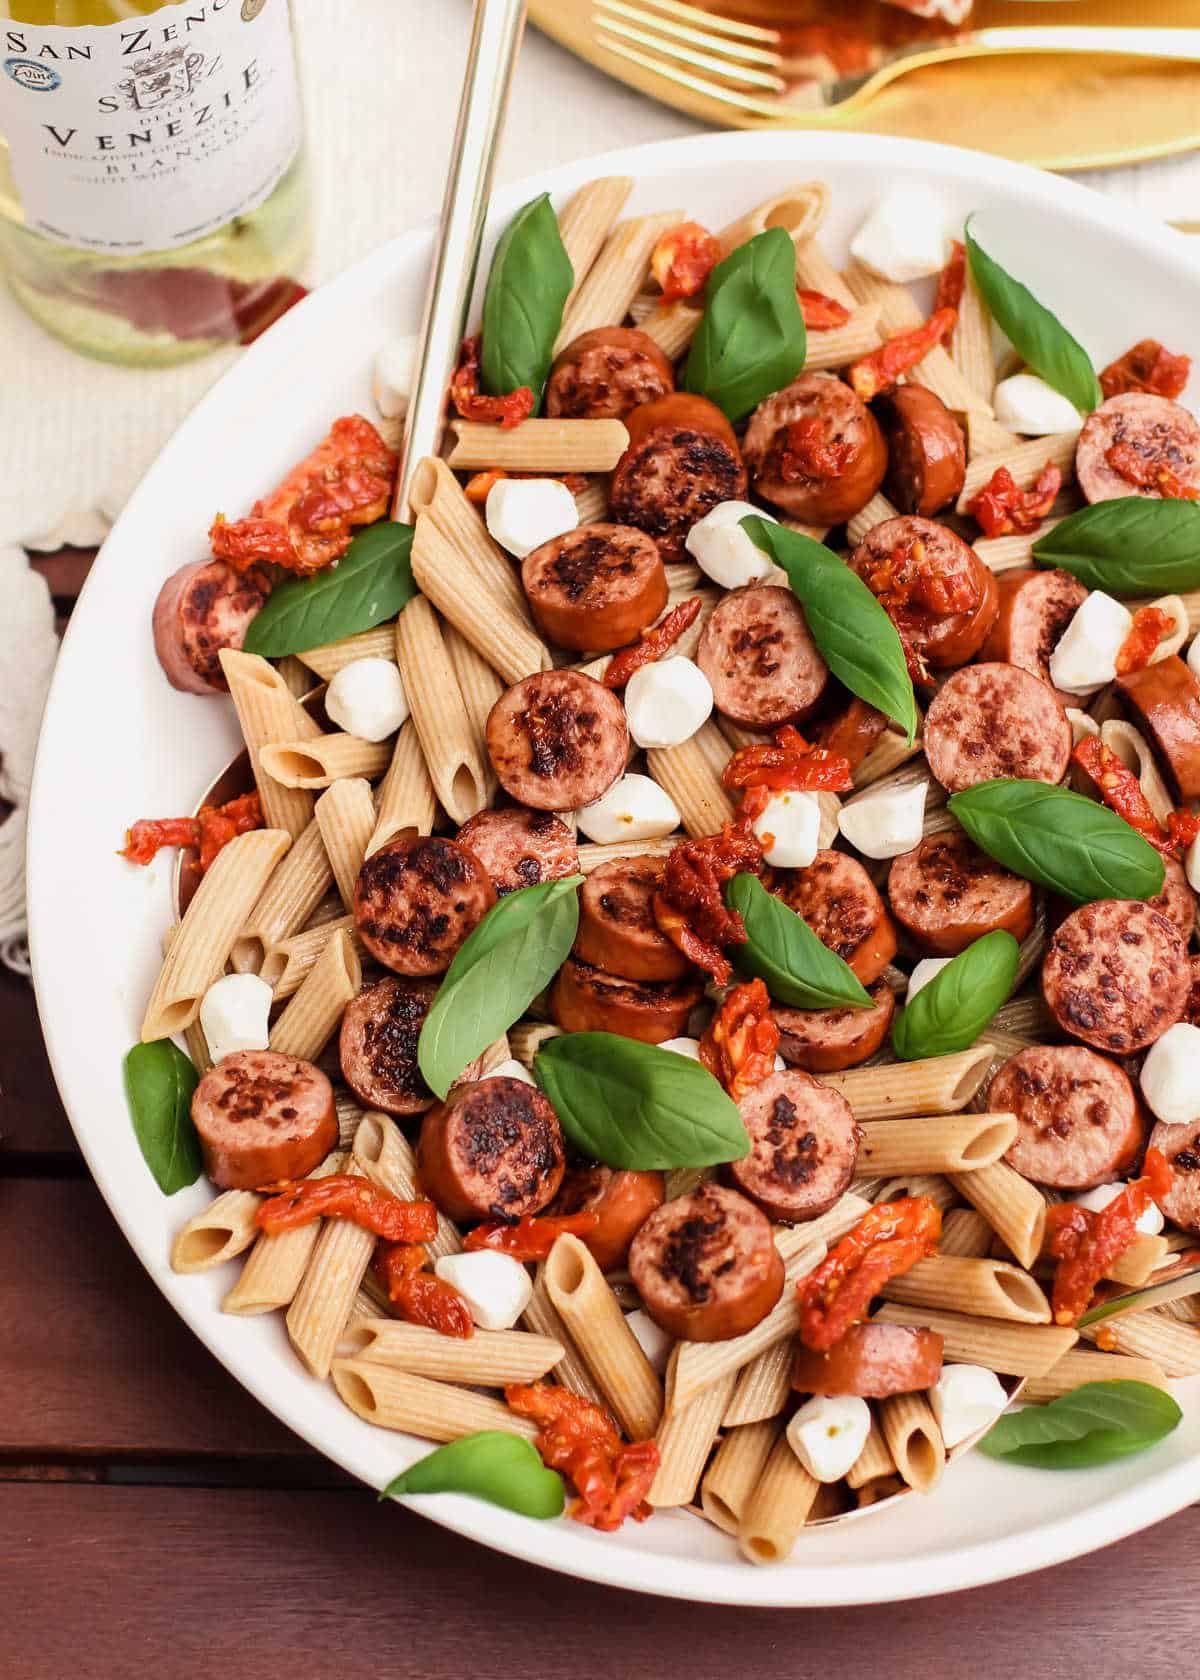 round bowl of penne pasta with sliced sausage, sundried tomatoes, mozzarella balls, and basil leaves.